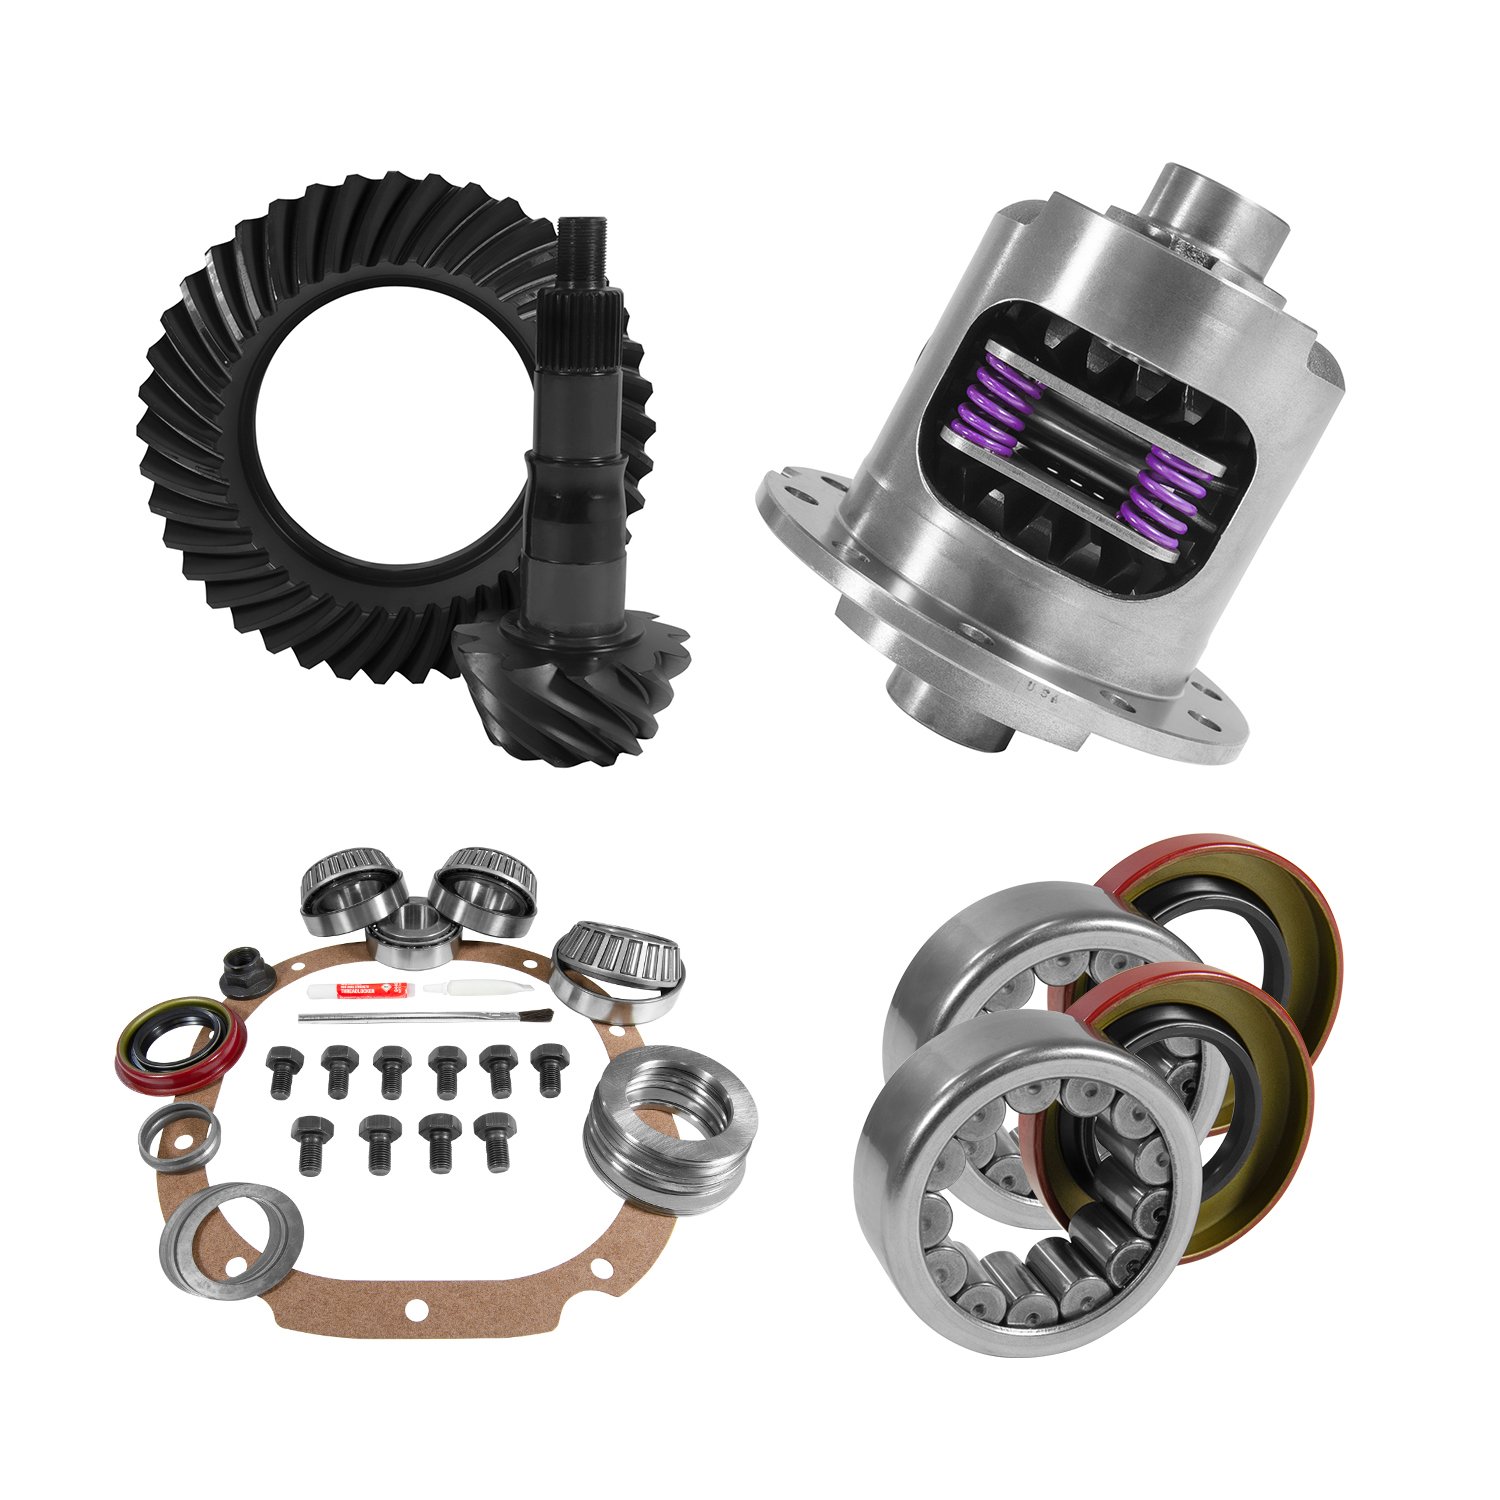 USA Standard 10764 8.8 in. Ford 4.56 Rear Ring & Pinion Install Kit, 31Spl Posi, 2.99 in. Axle Bearings